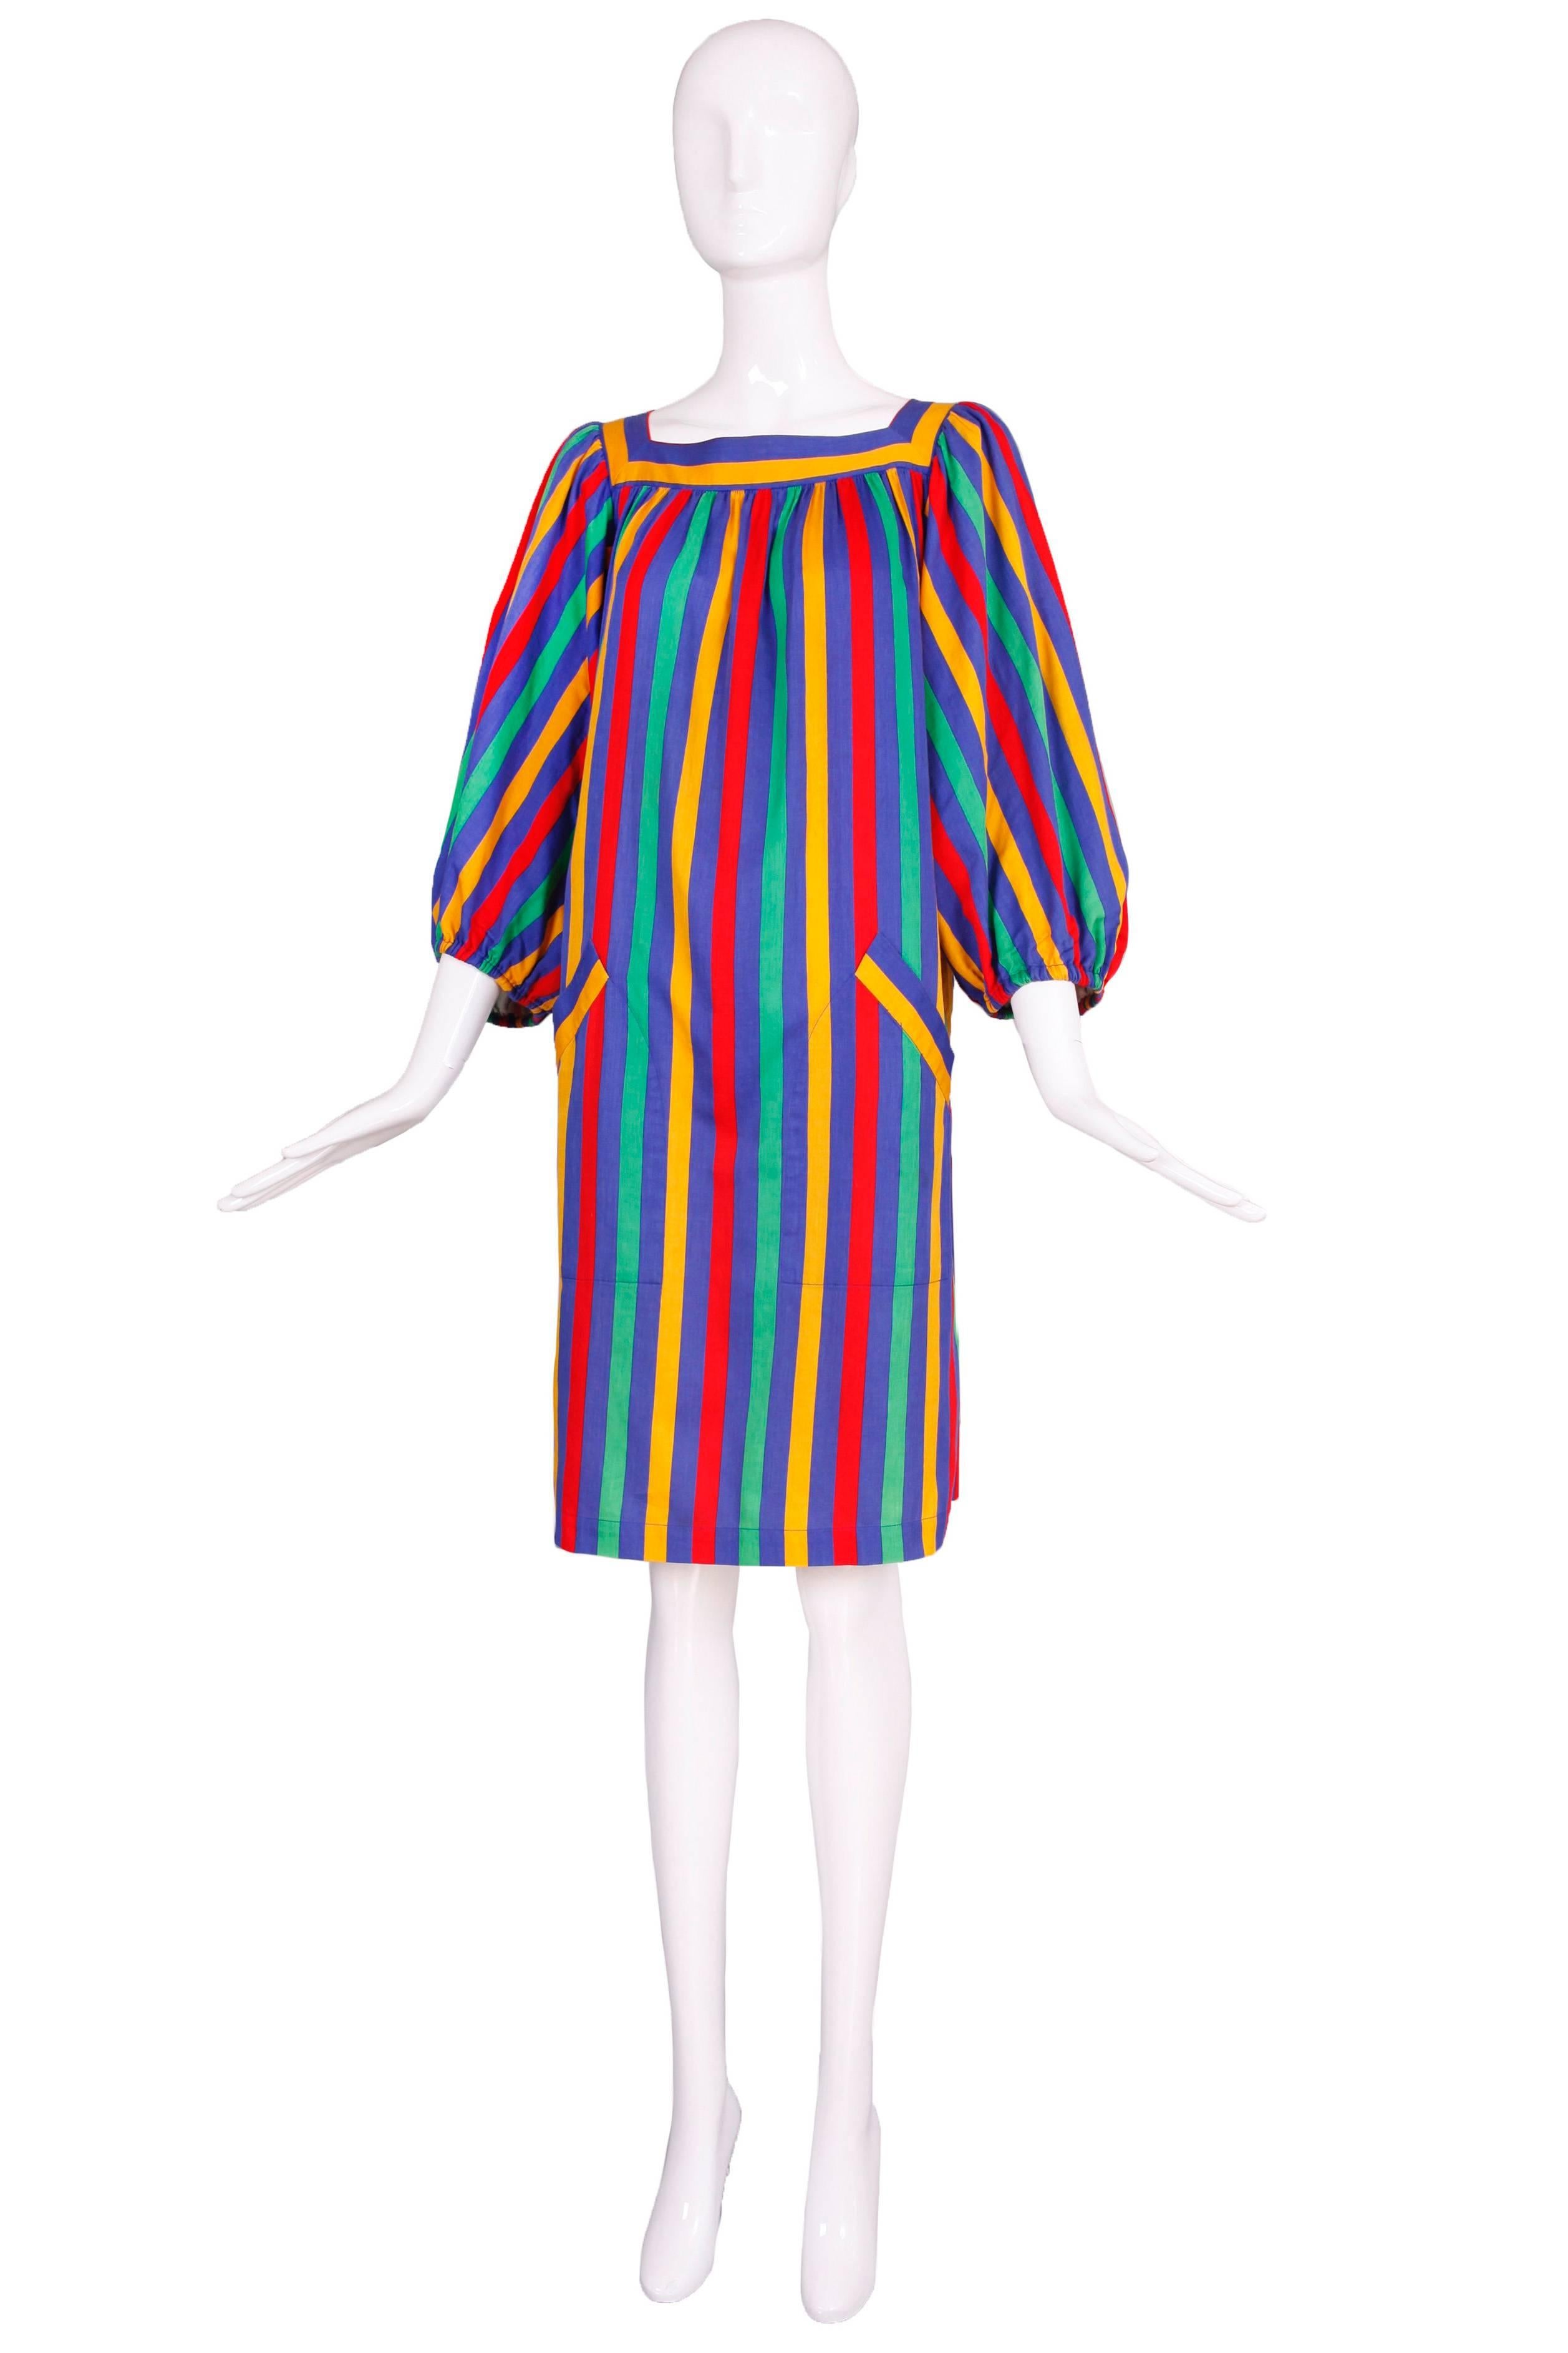 Vintage Yves Saint Laurent polished cotton striped smock dress with a bateau style neckline, full 3/4 balloon sleeves, slits up either side and frontal pockets. In excellent condition. Please consult measurements.
MEASUREMENTS:
Bust - 38"
Waist